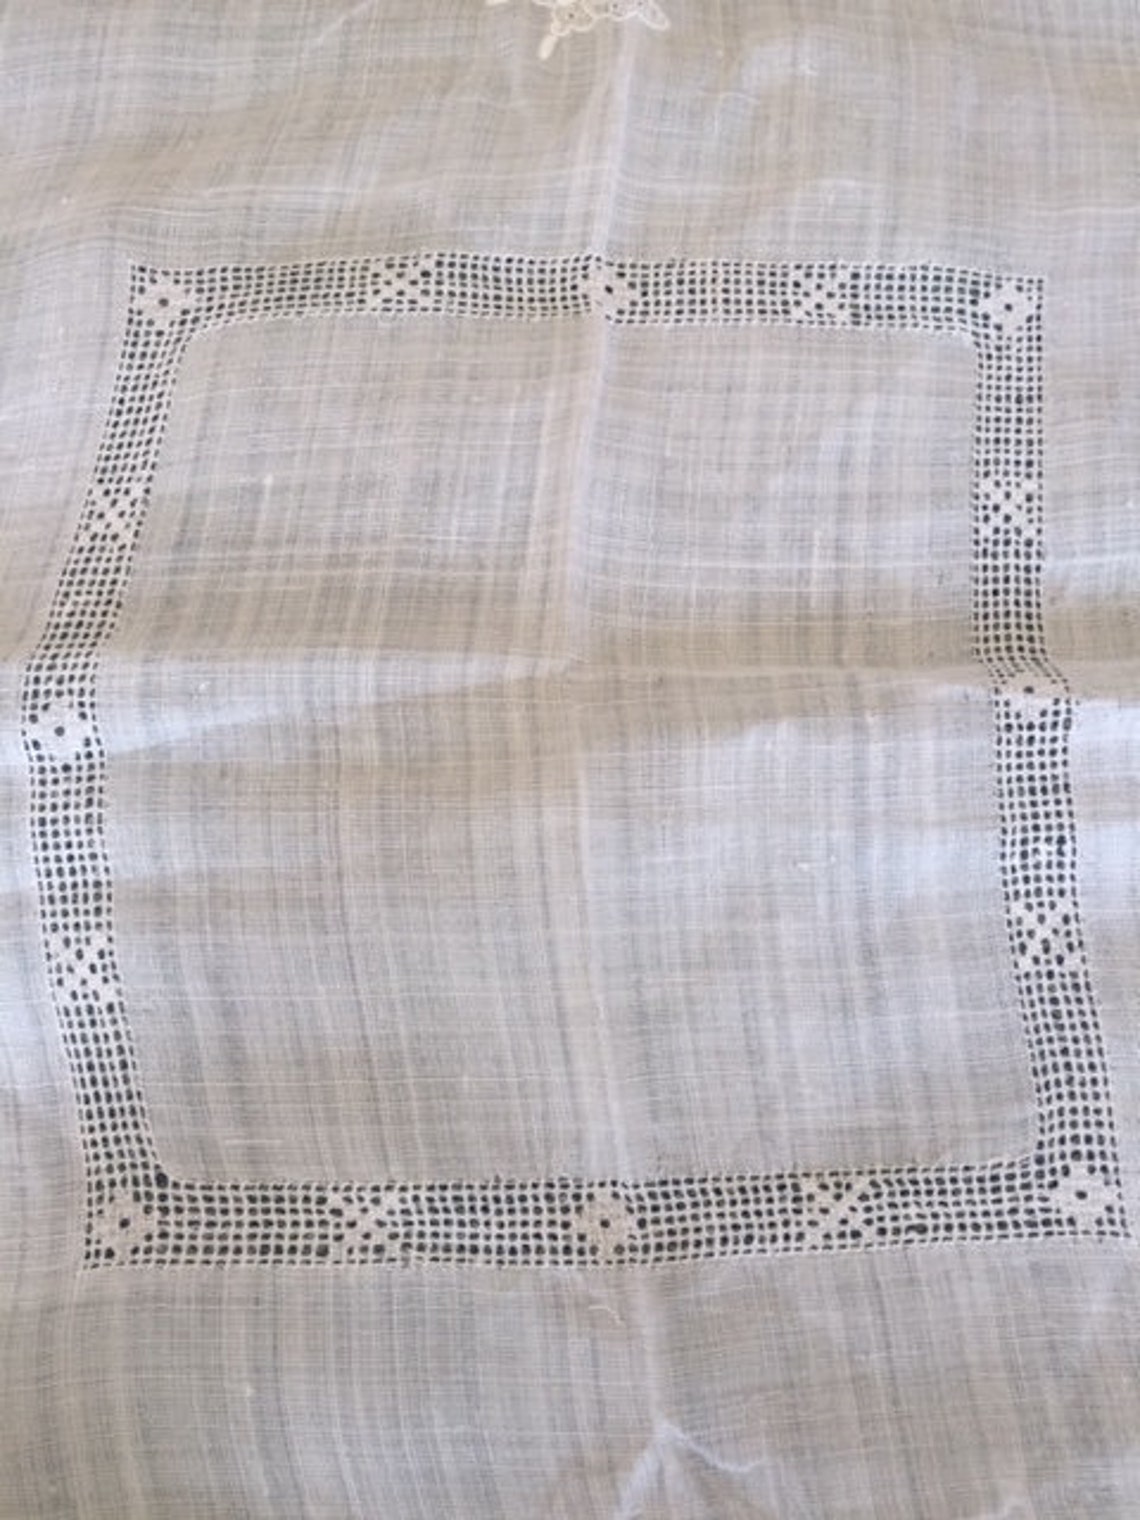 White Sheer Pina Linen Tablecloth With Drawn Thread Work and ...